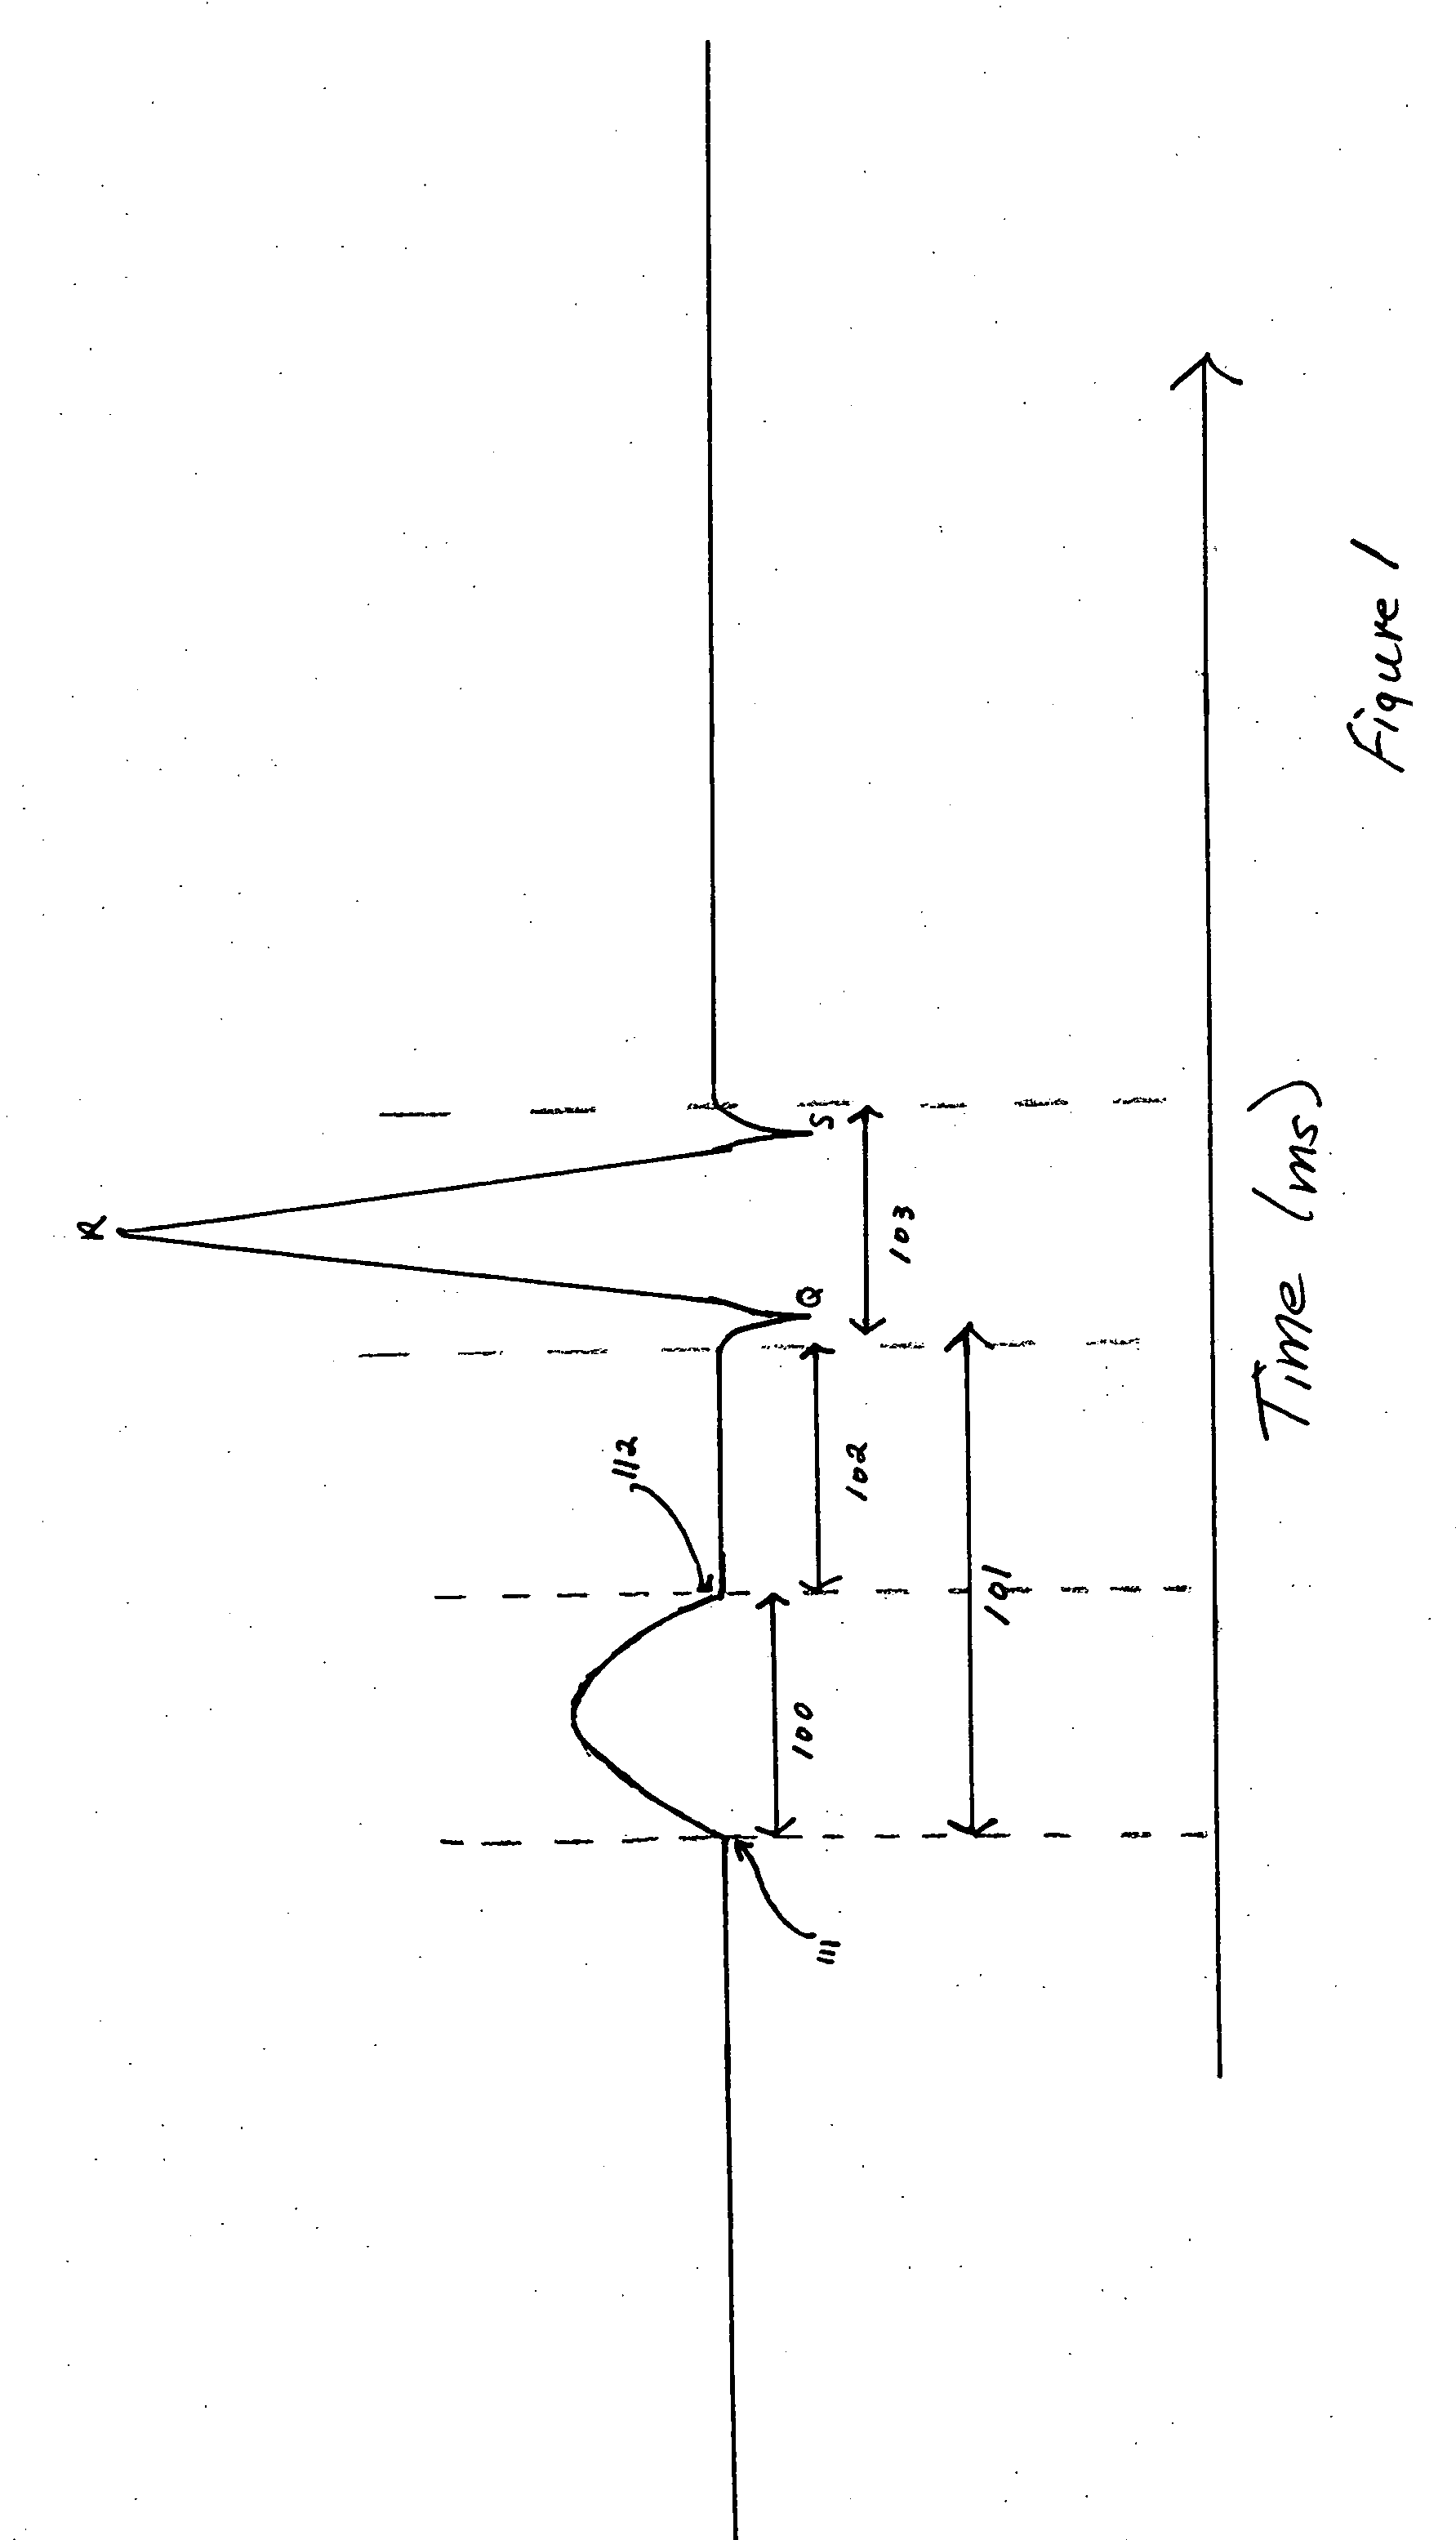 Cardiac pacemaker with dynamic conduction time monitoring